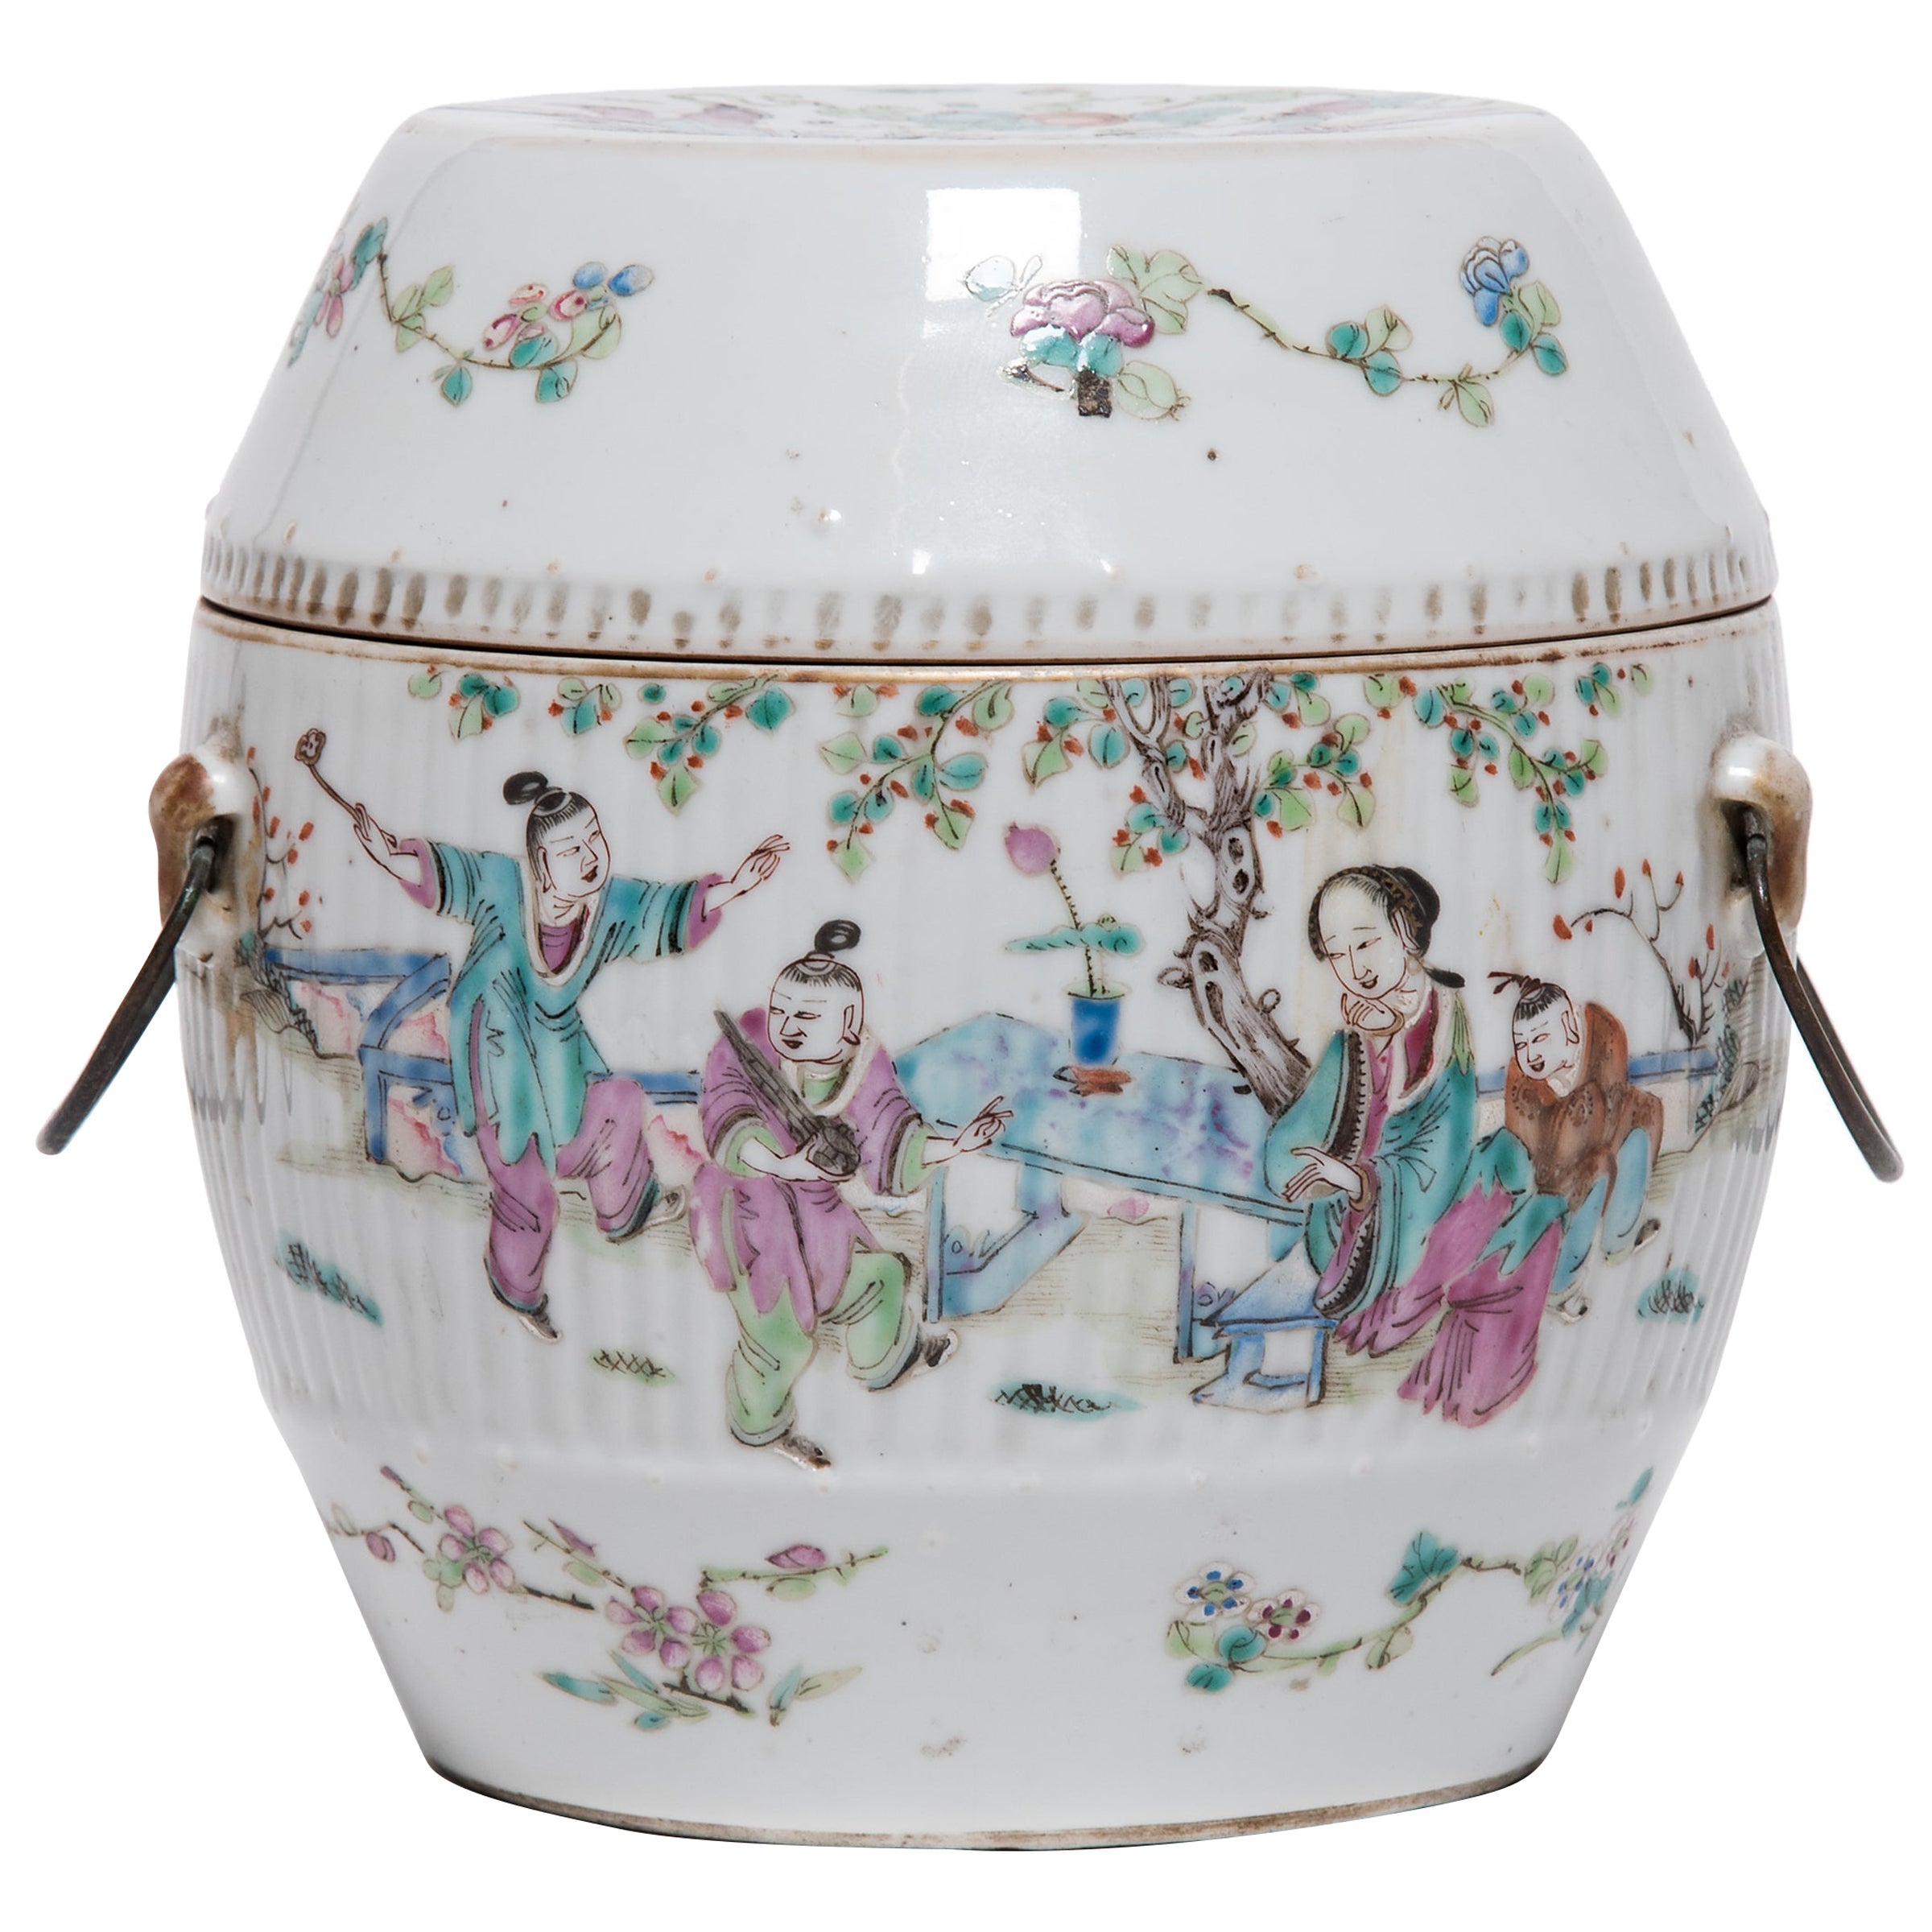 Chinese Famille Rose Soup Tureen with Children in Garden, c. 1900